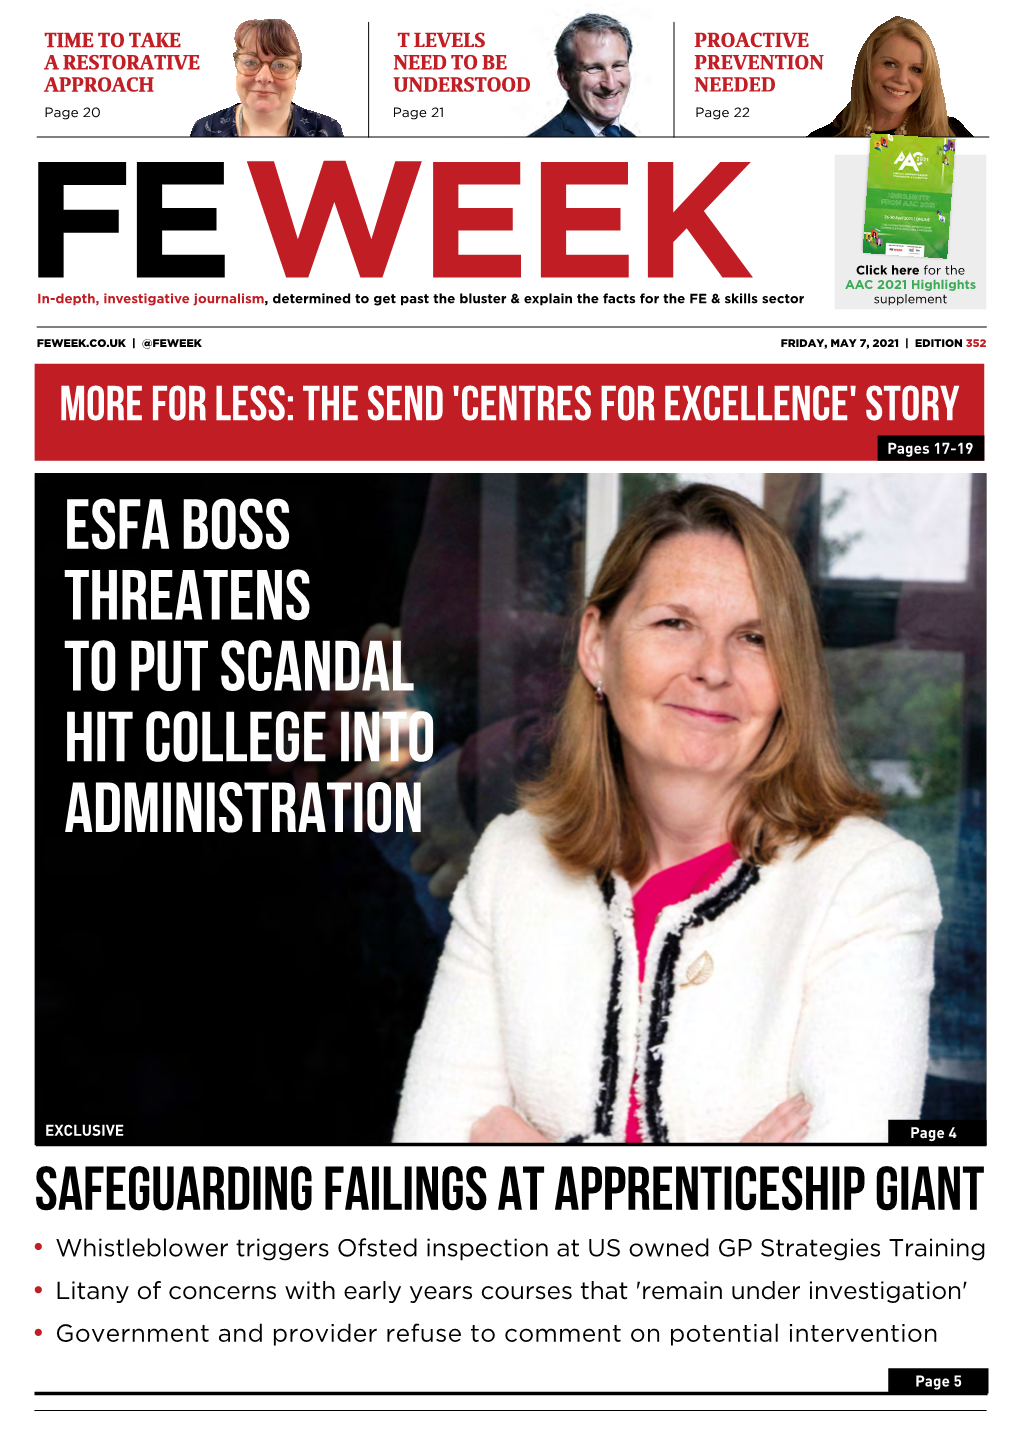 Esfa Boss Threatens to Put Scandal Hit College Into Administration